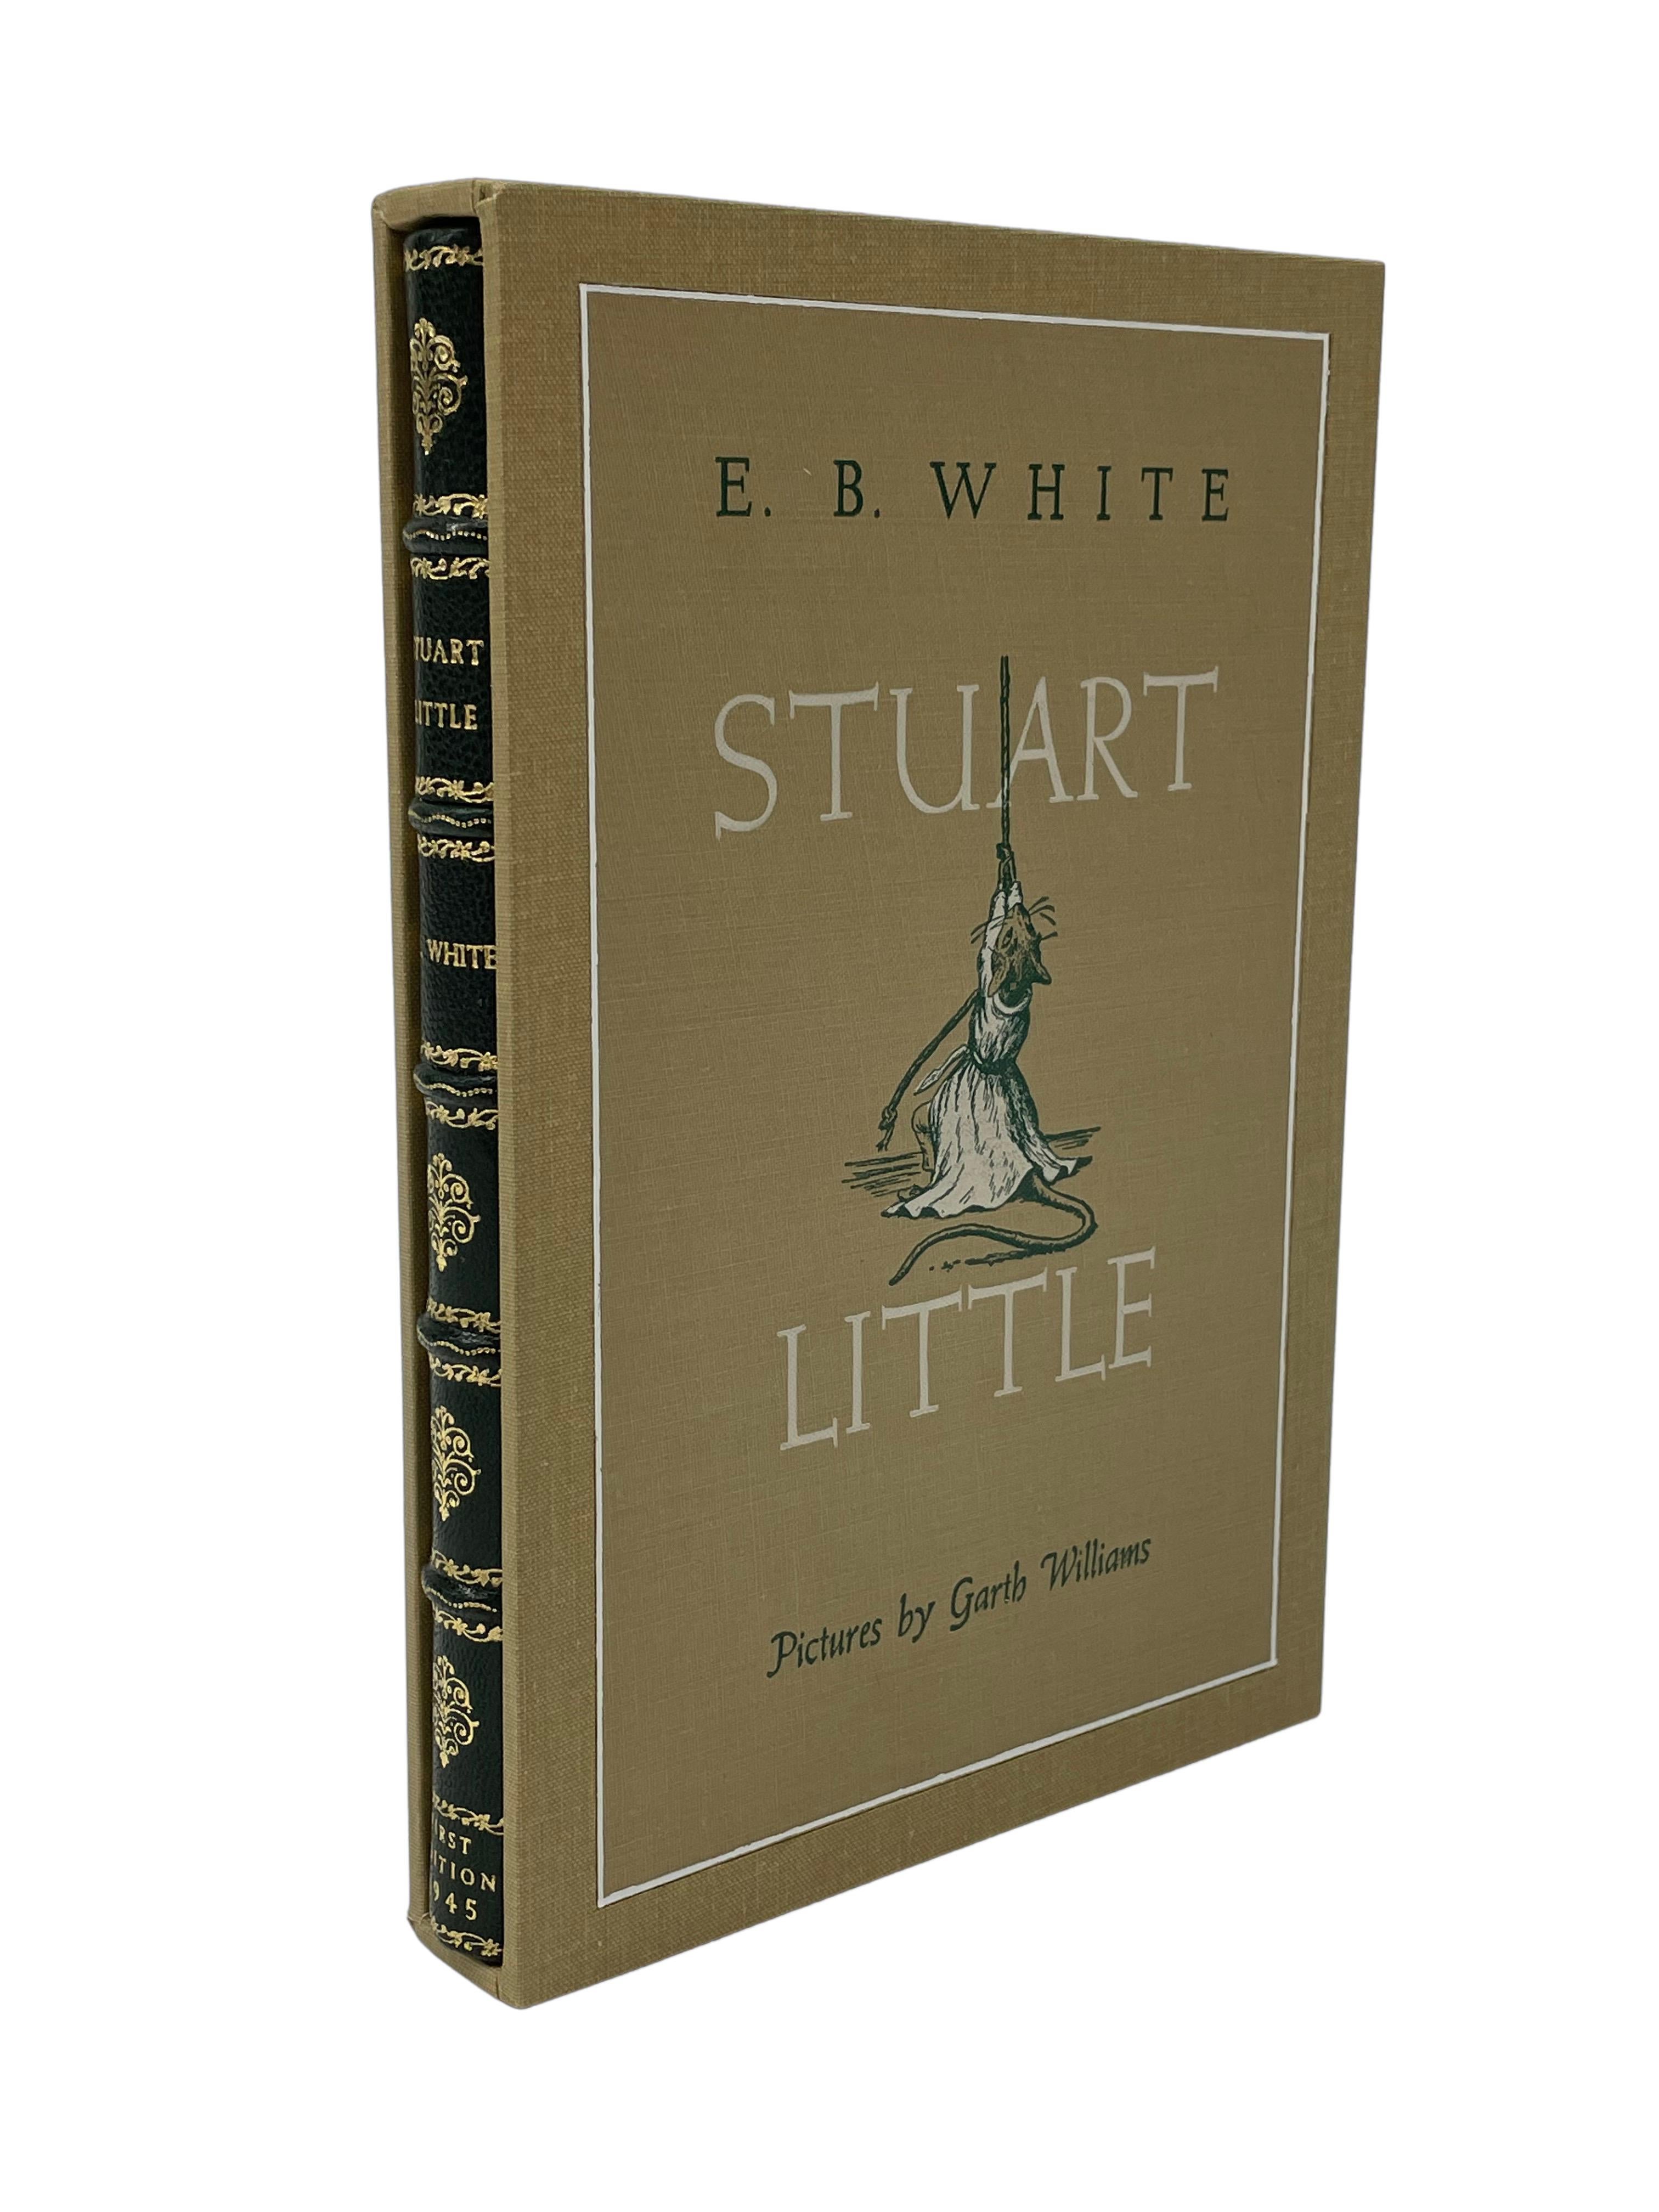 White, Elwyn Brooks. Stuart Little. New York: Harper & Brothers, 1945. First edition. Illustrated by Garth Williams. Rebound in 1/4 green leather and tan cloth with a color illustration of Stuart Little inlaid on the front, gilt tooling, titles, and